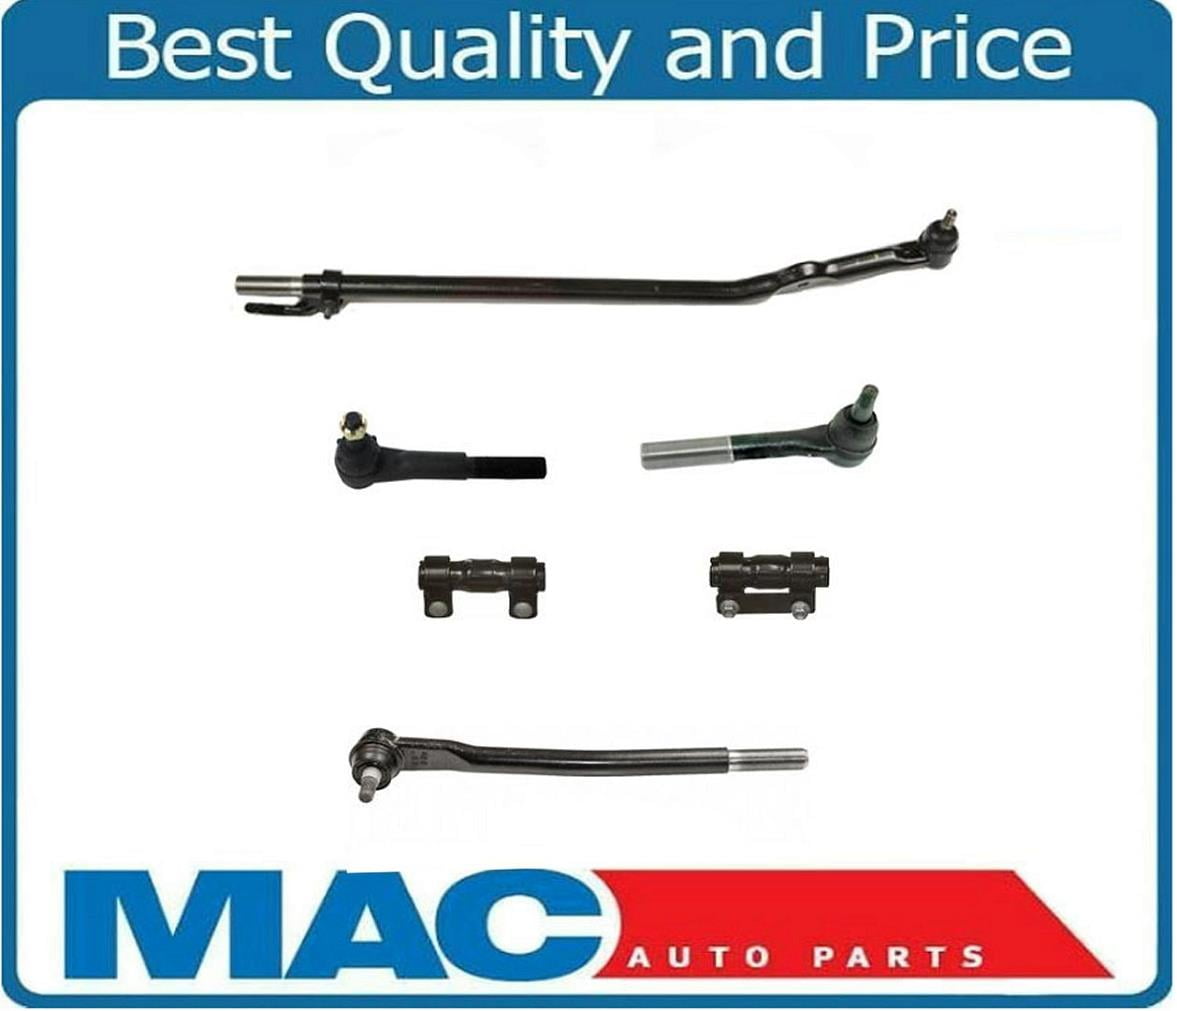 Excursion F350 F250 SD Drag Link & Tie Rod Rods 2 Wheel 6Pc Twin I Beam Axles 